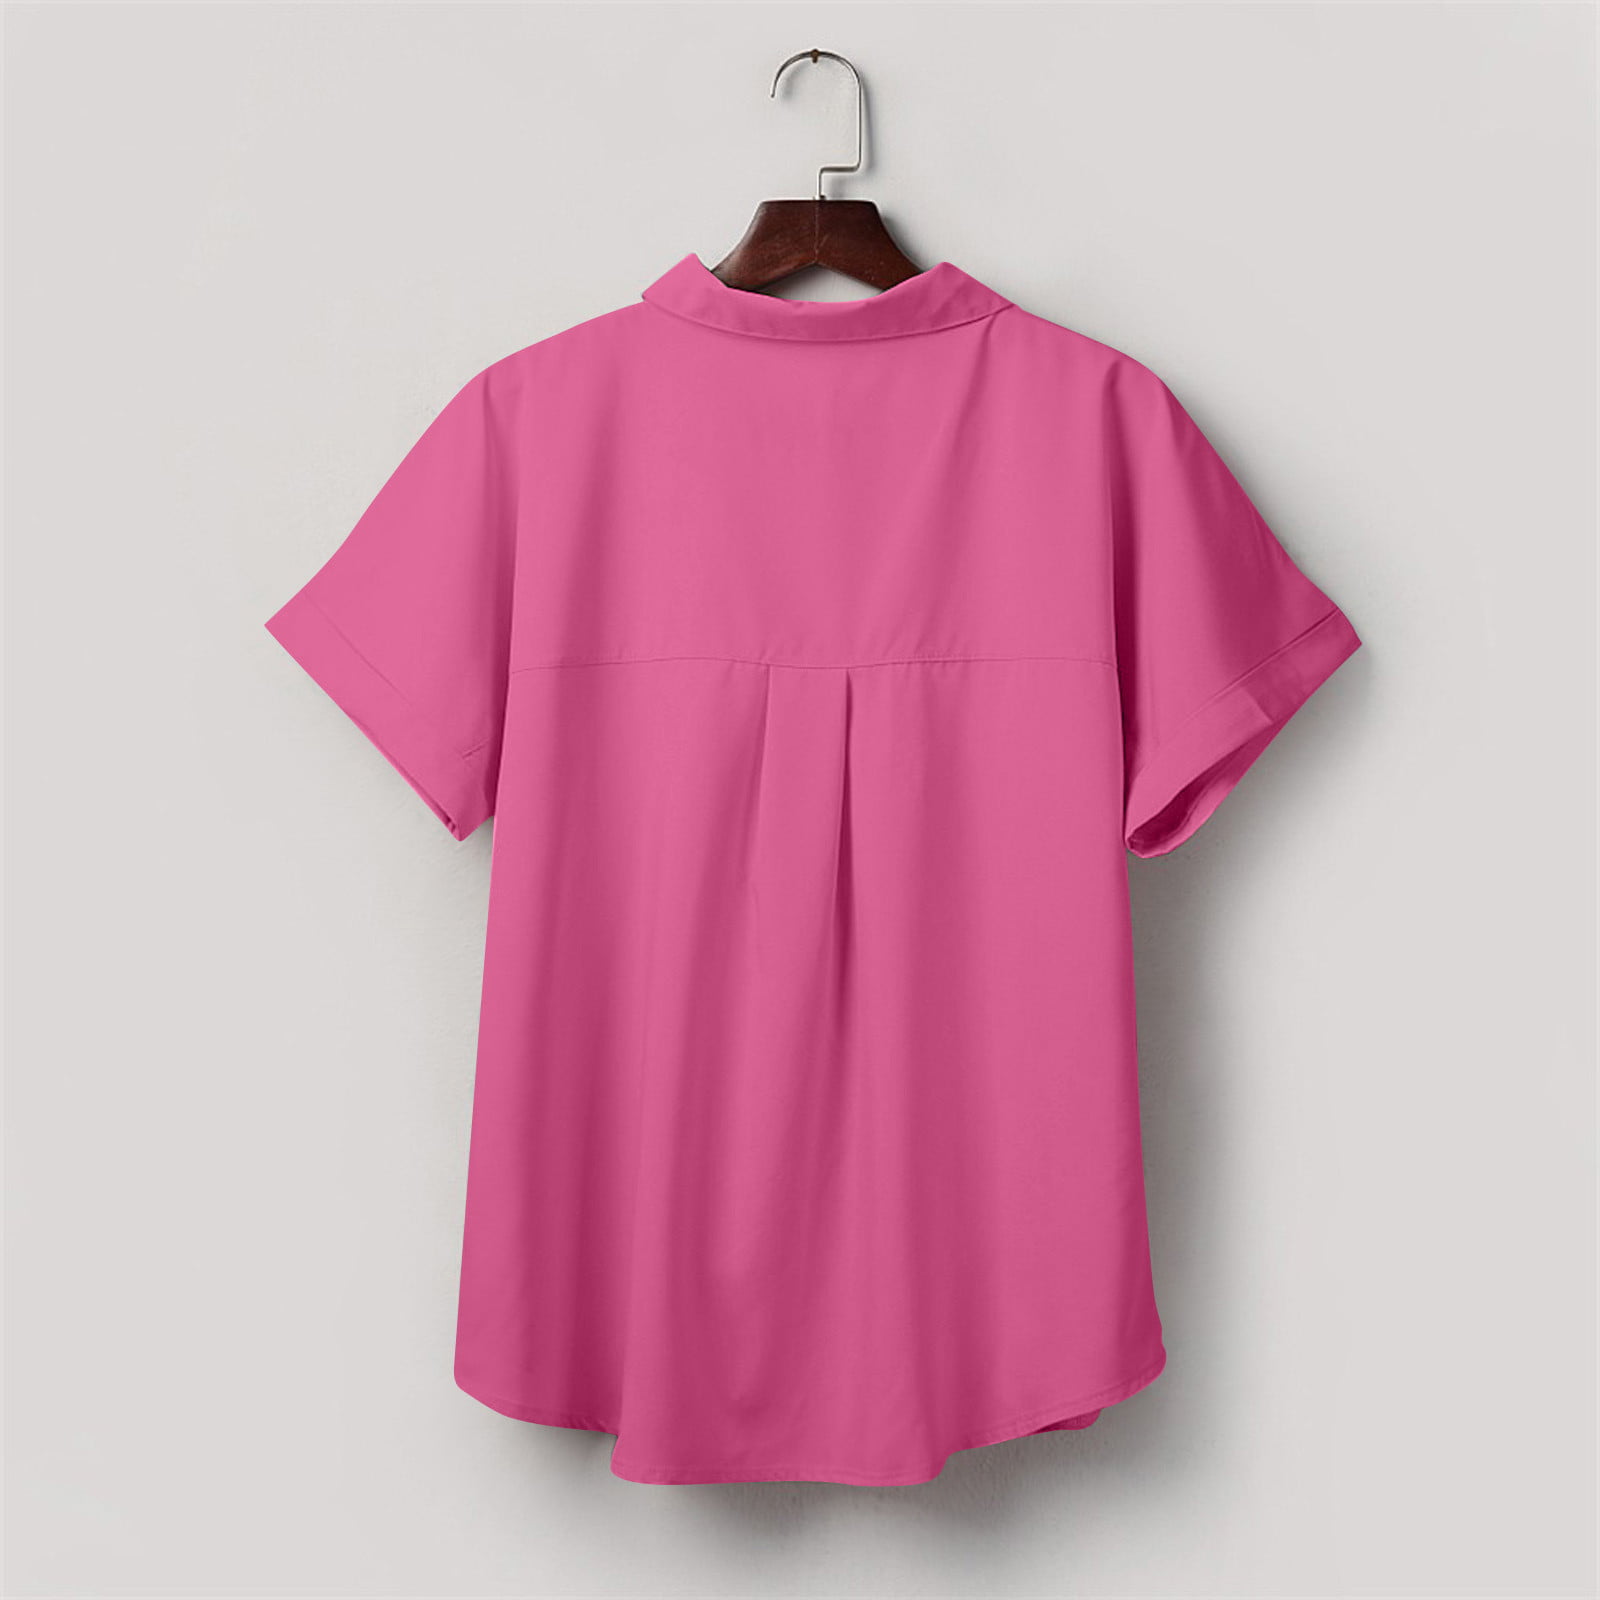 ZQGJB Womens Casual Short Sleeve Button Down Cotton Linen Shirt Solid Color  Blouse Loose Fit Cute Plain Tees Lightweight Casual V-Neck Tops Hot Pink